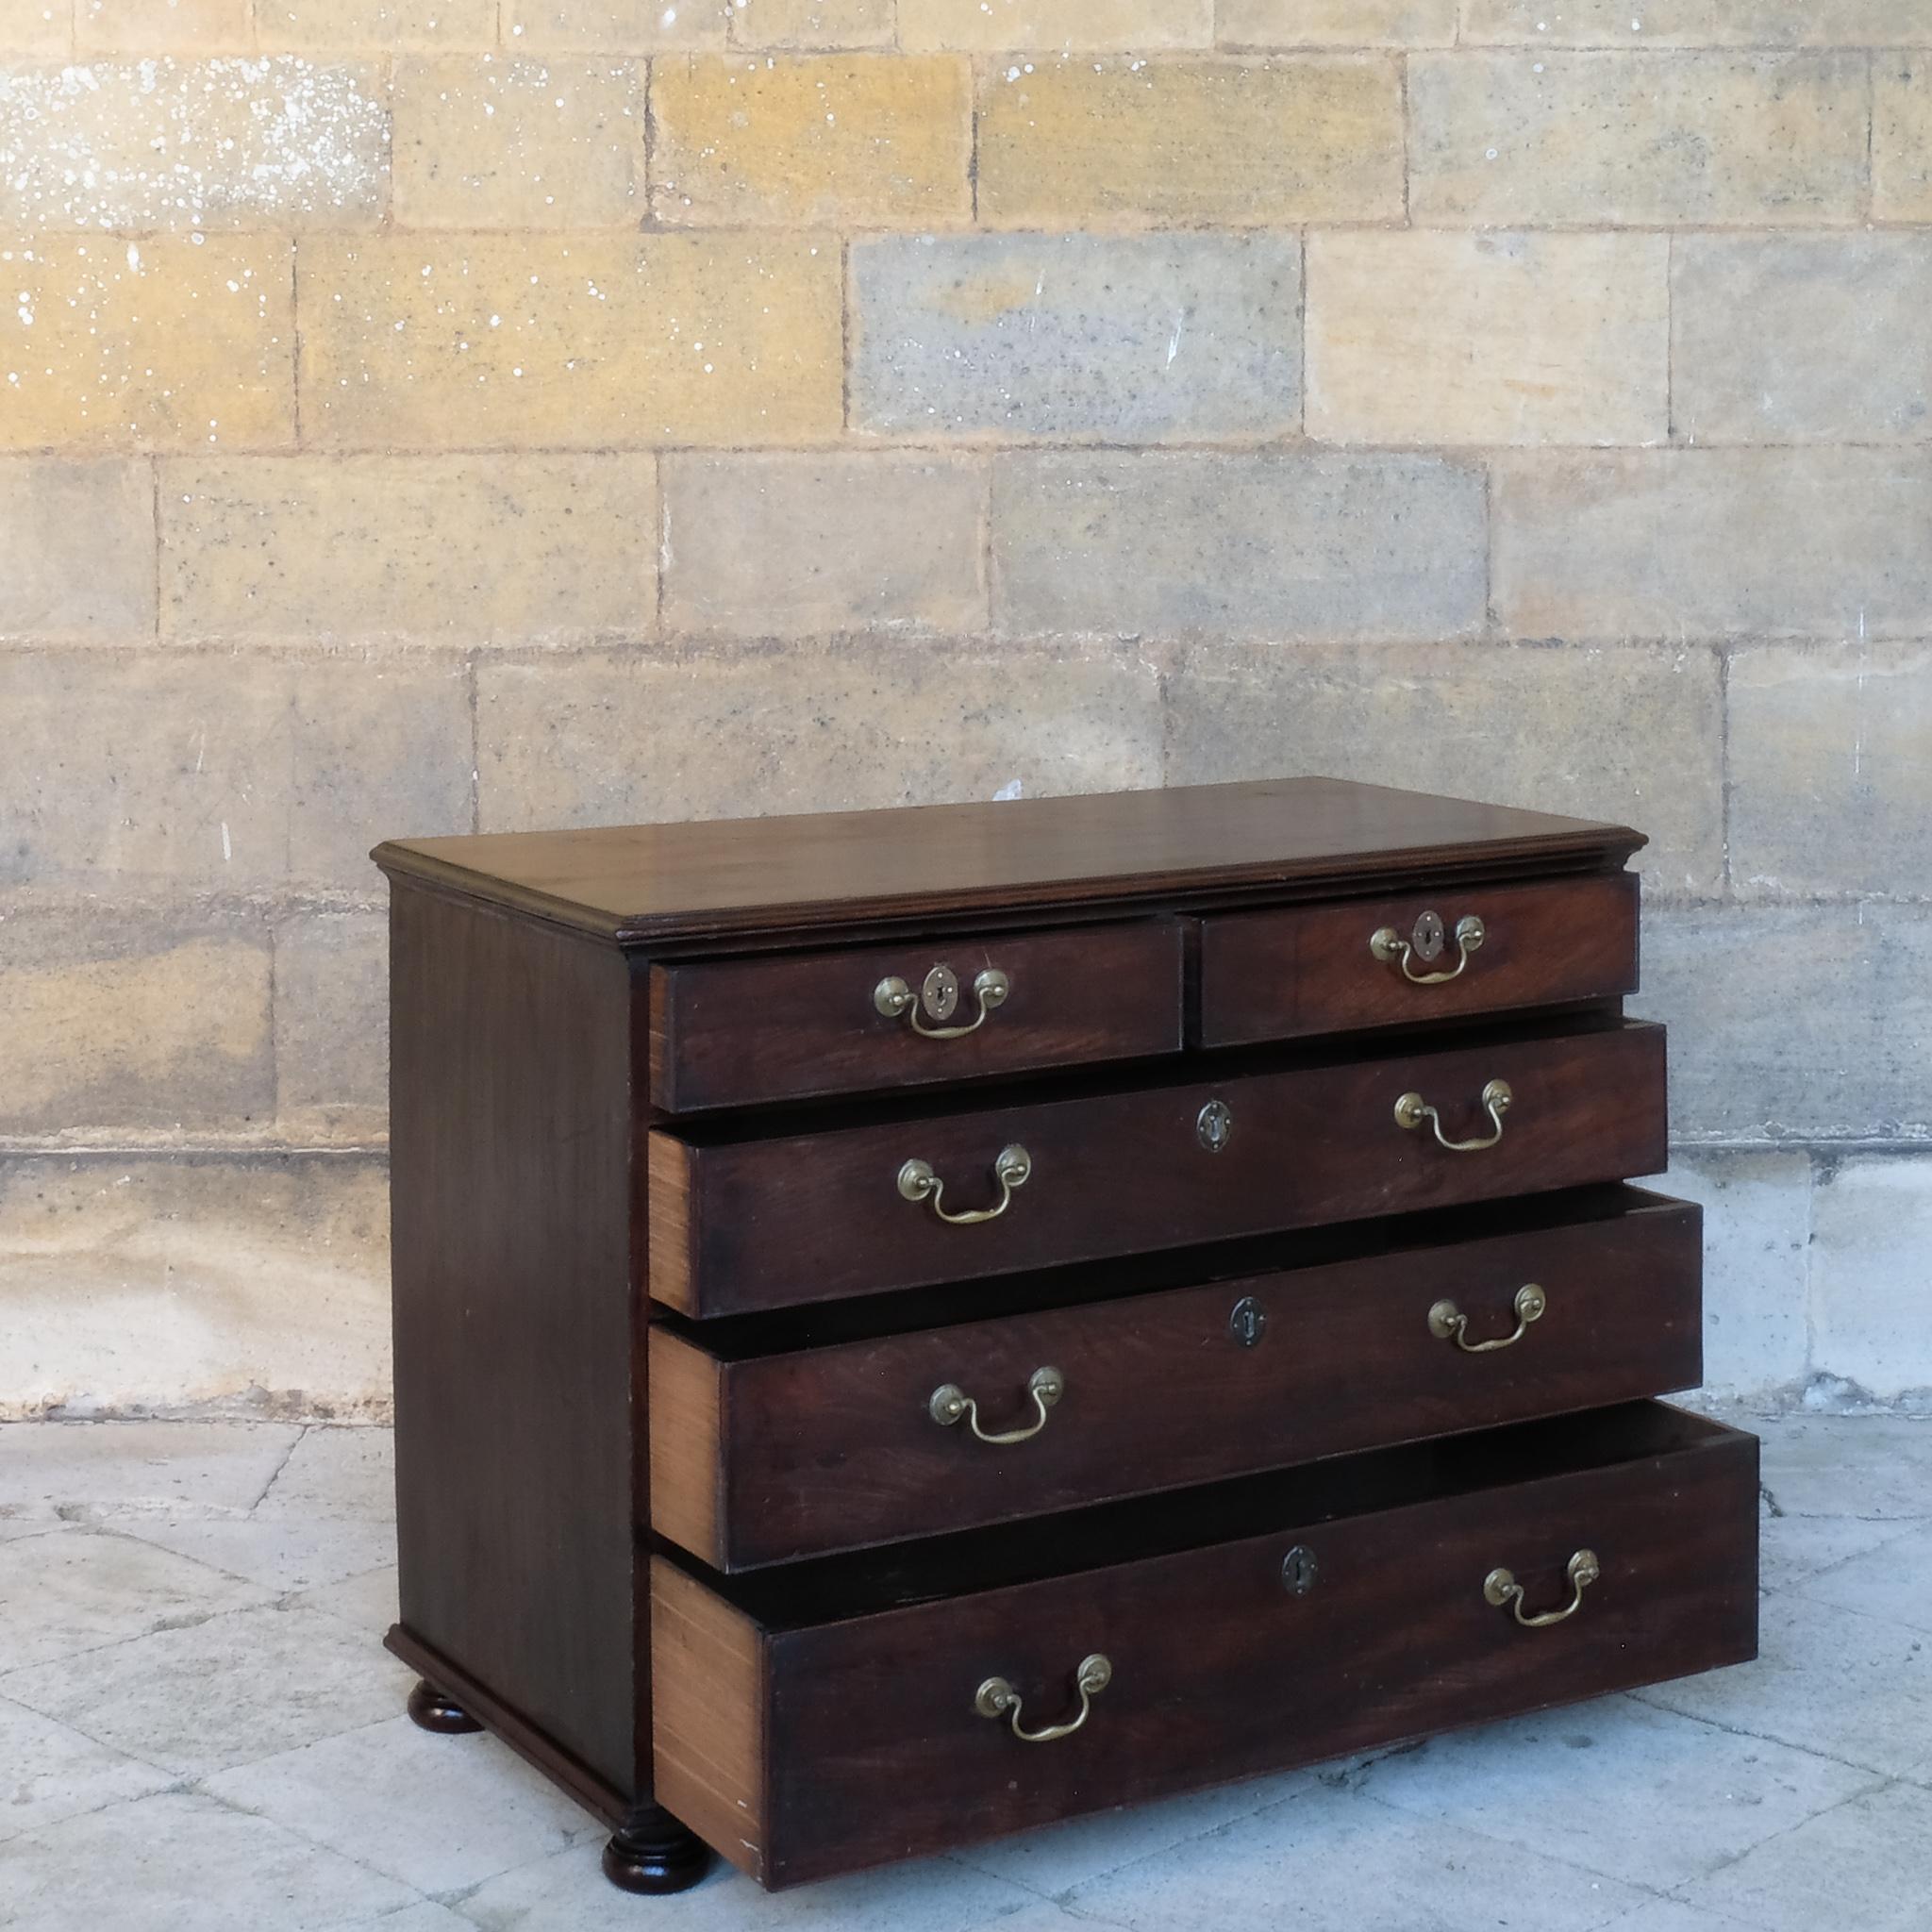 18th Century Mahogany Chest Of Drawers In Good Condition For Sale In Kettering, GB